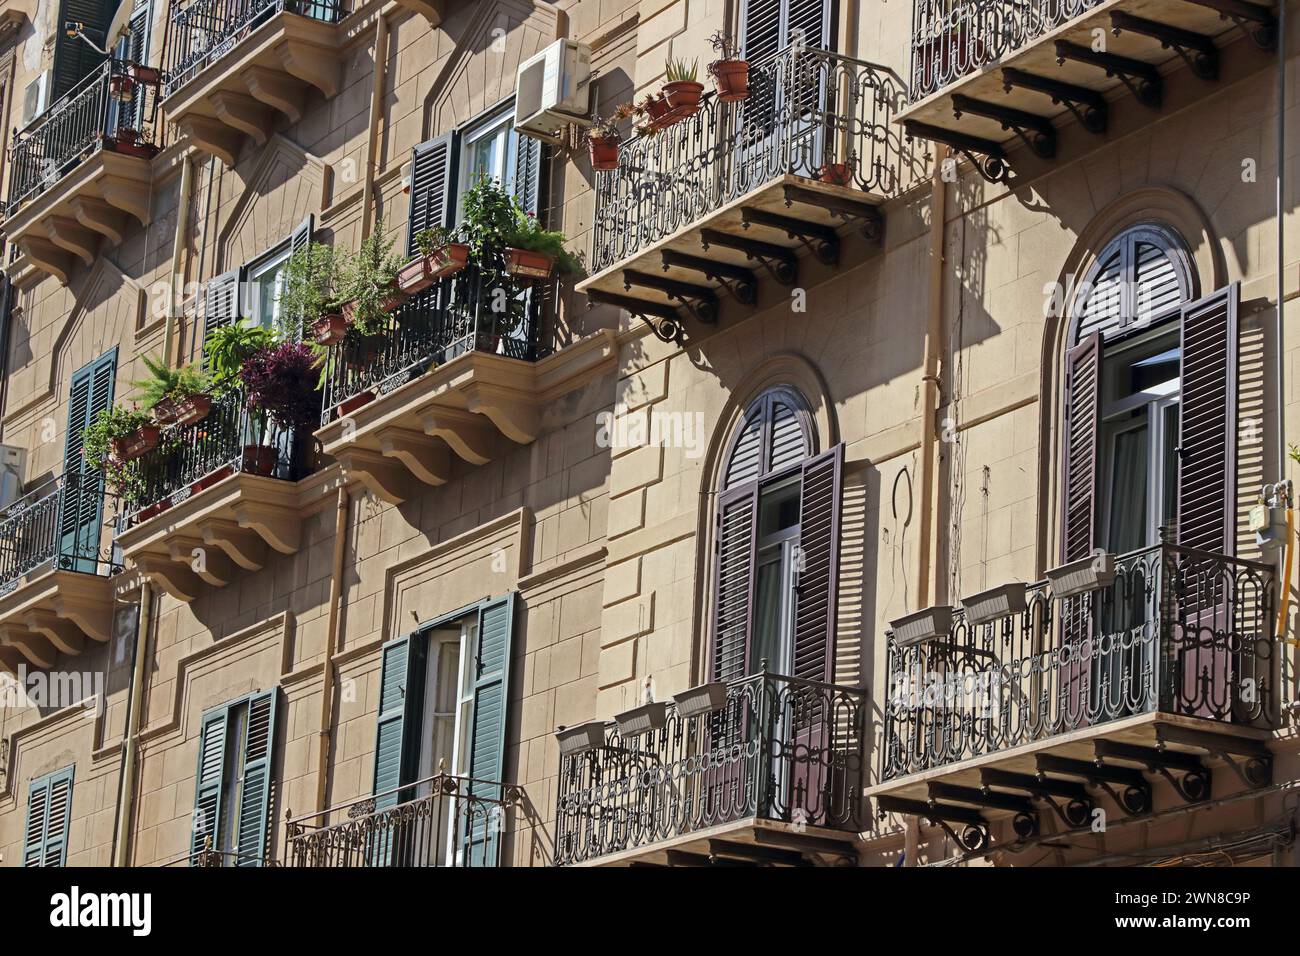 Traditional block of house with balconies and metal railings, Palermo, Sicily Stock Photo